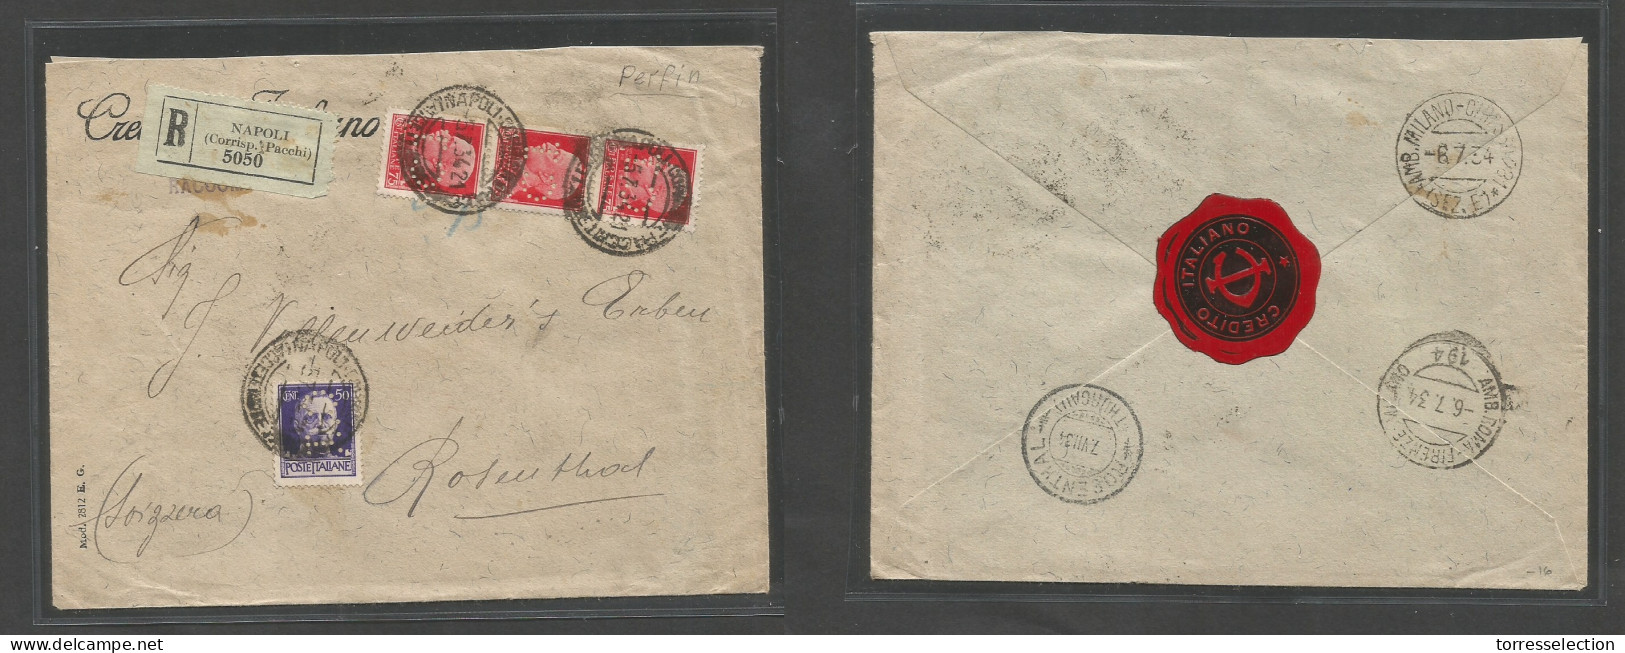 Italy - XX. 1934 (5 July) Napoli - Switzerland, Rosenthal (7 July) Registered Multifkd Perfin CI Envelope. SALE. - Sin Clasificación